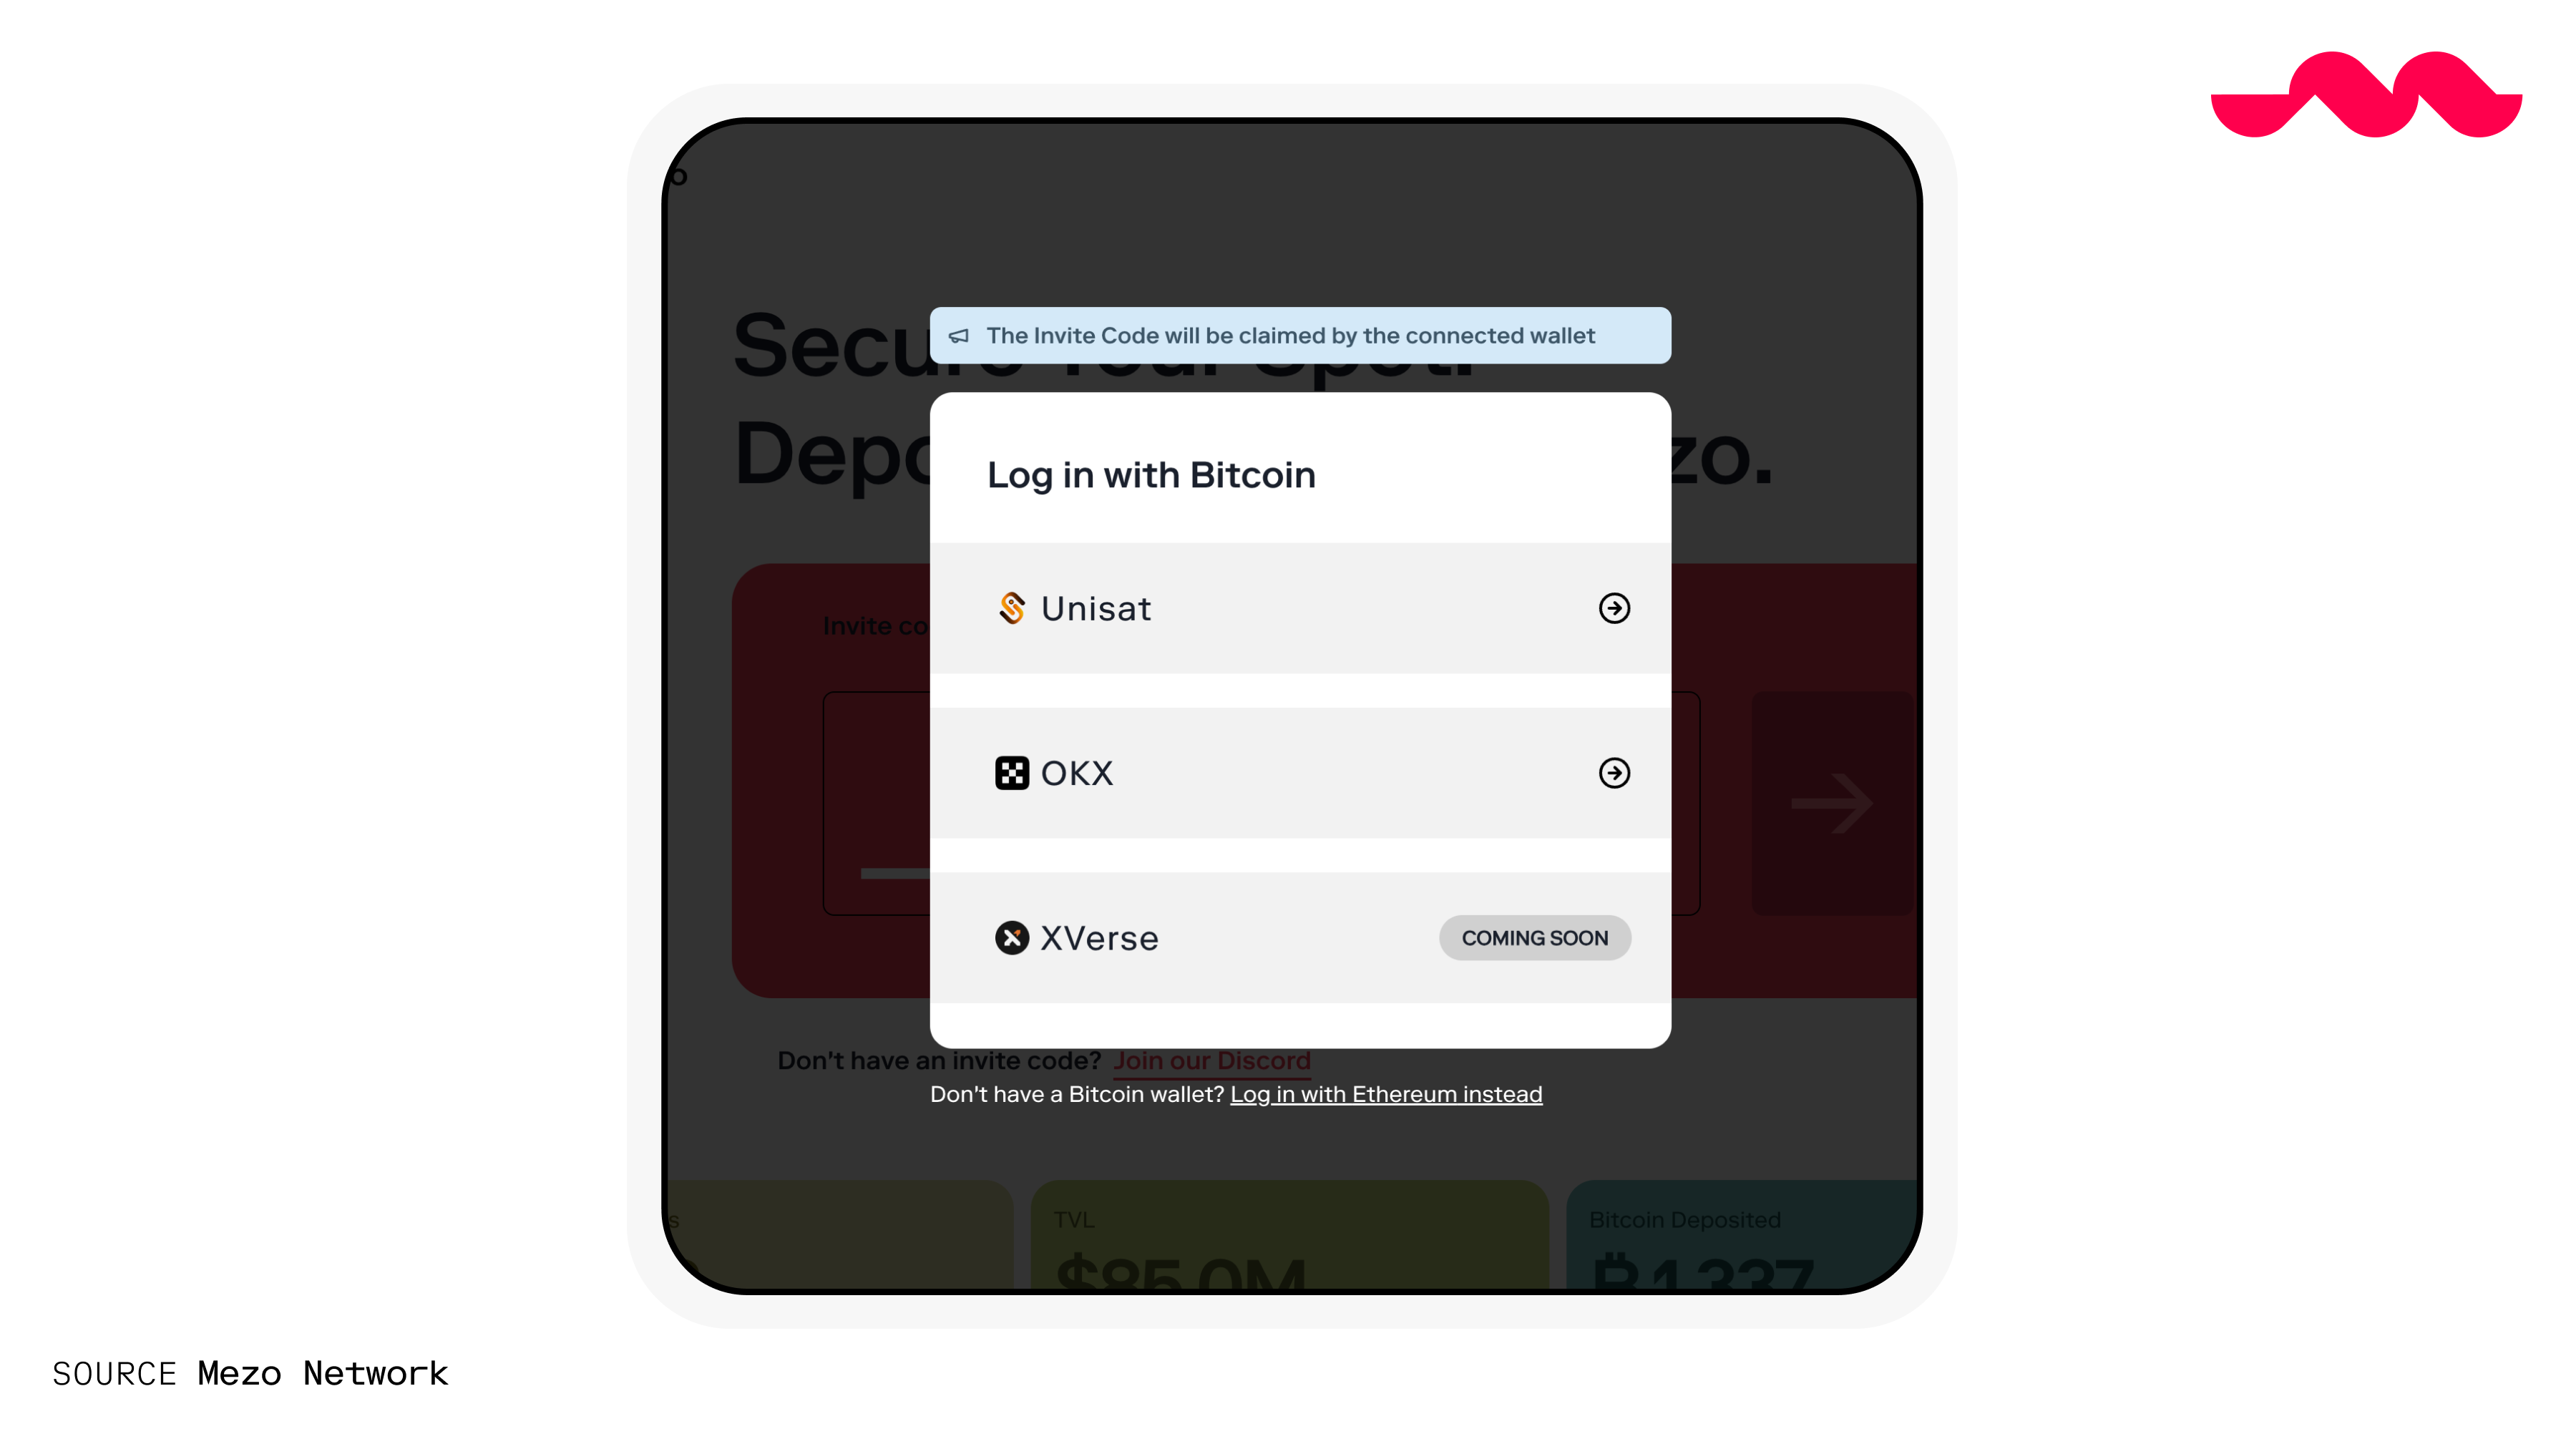 Log in with Bitcoin on Mezo